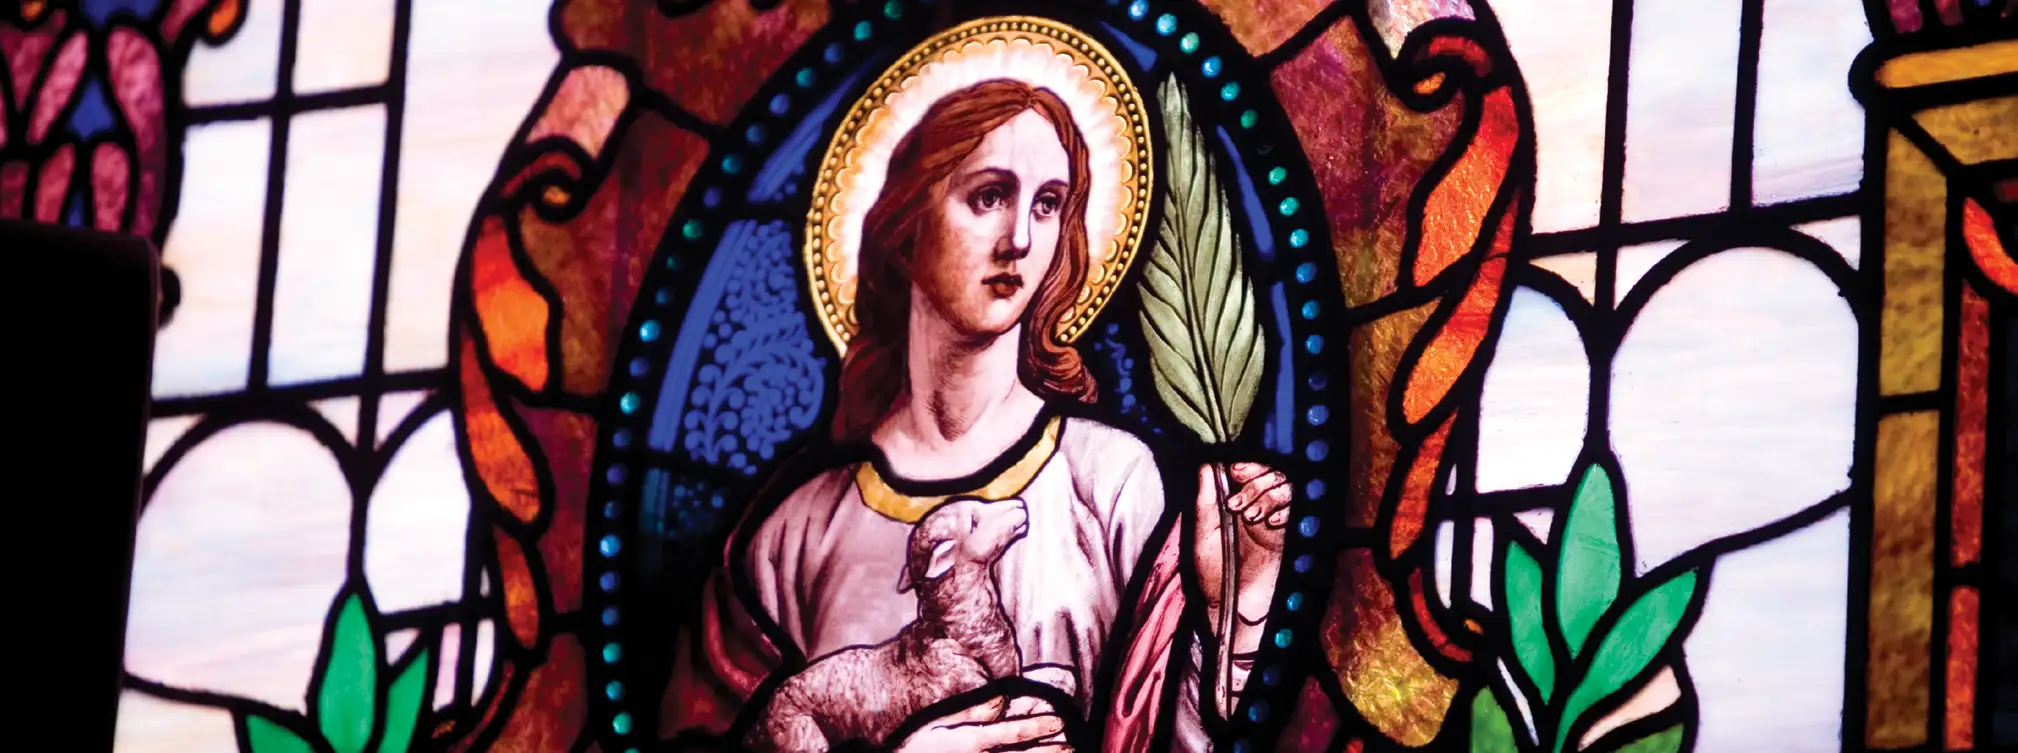 Stained glass with saint holding lamb